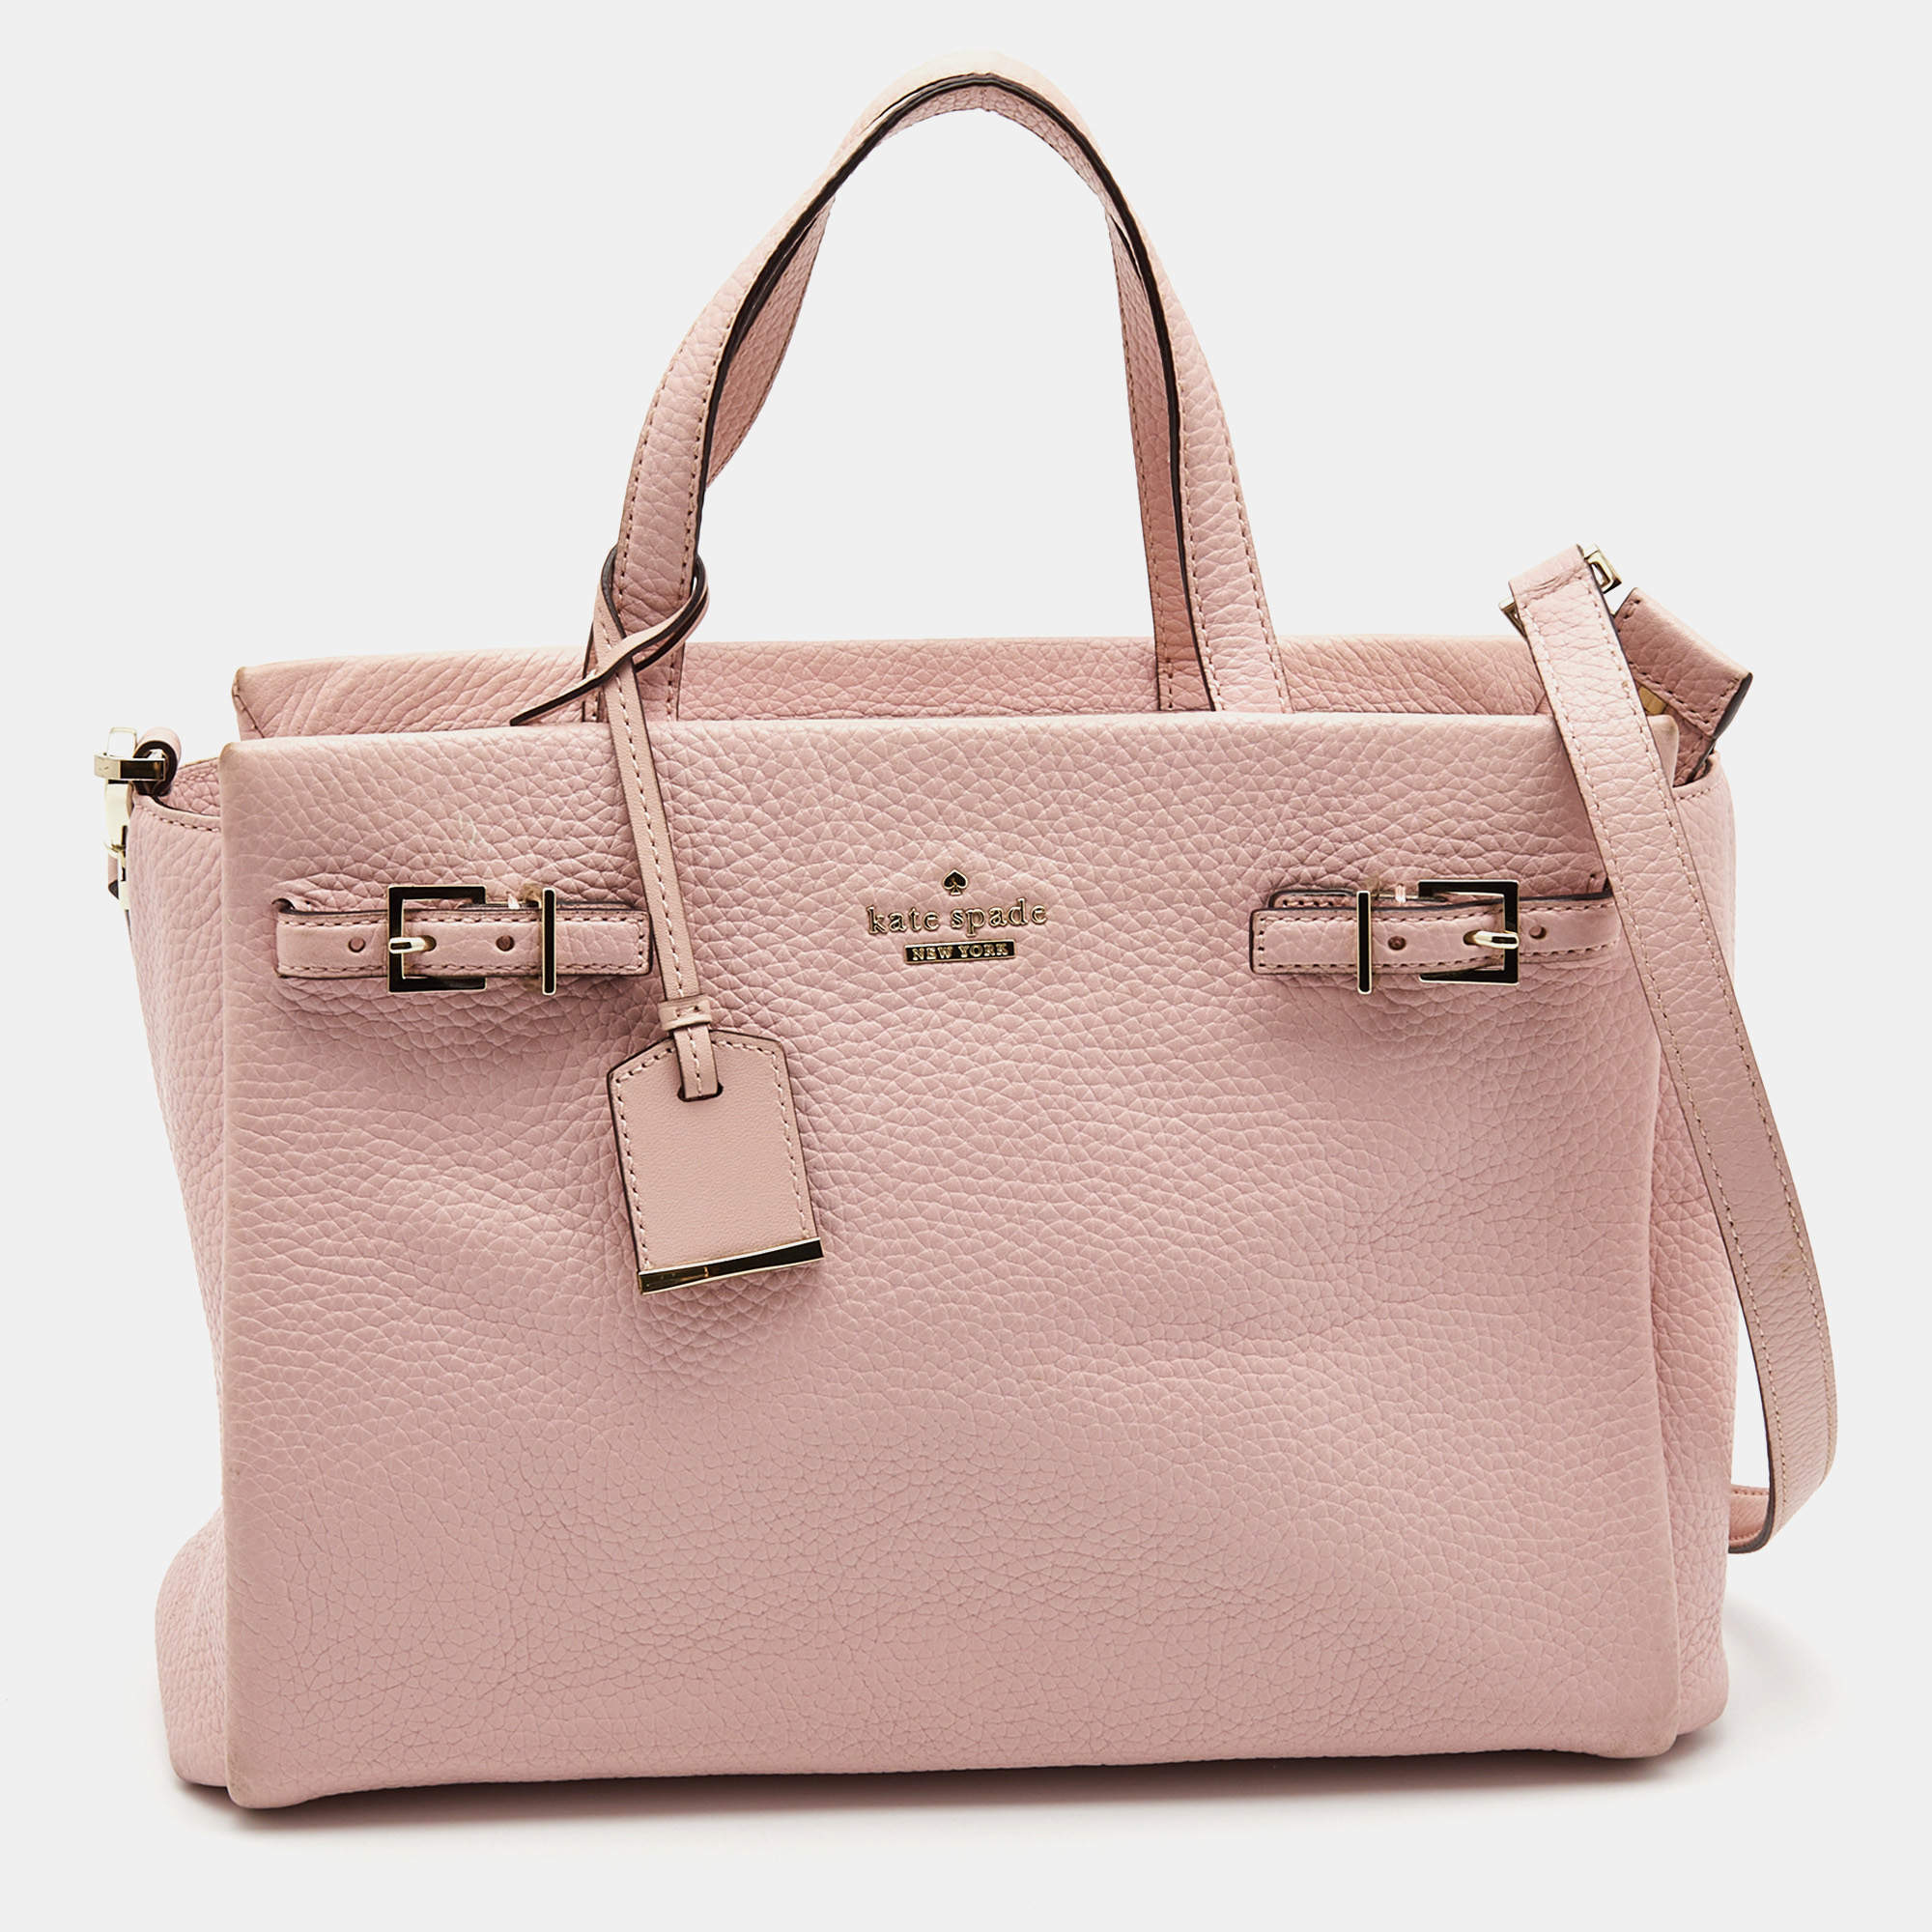 Kate Spade New York Philippines: The latest Kate Spade New York Kate Spade  New York Bags, Kate Spade New York Watches & more for sale in November, 2023